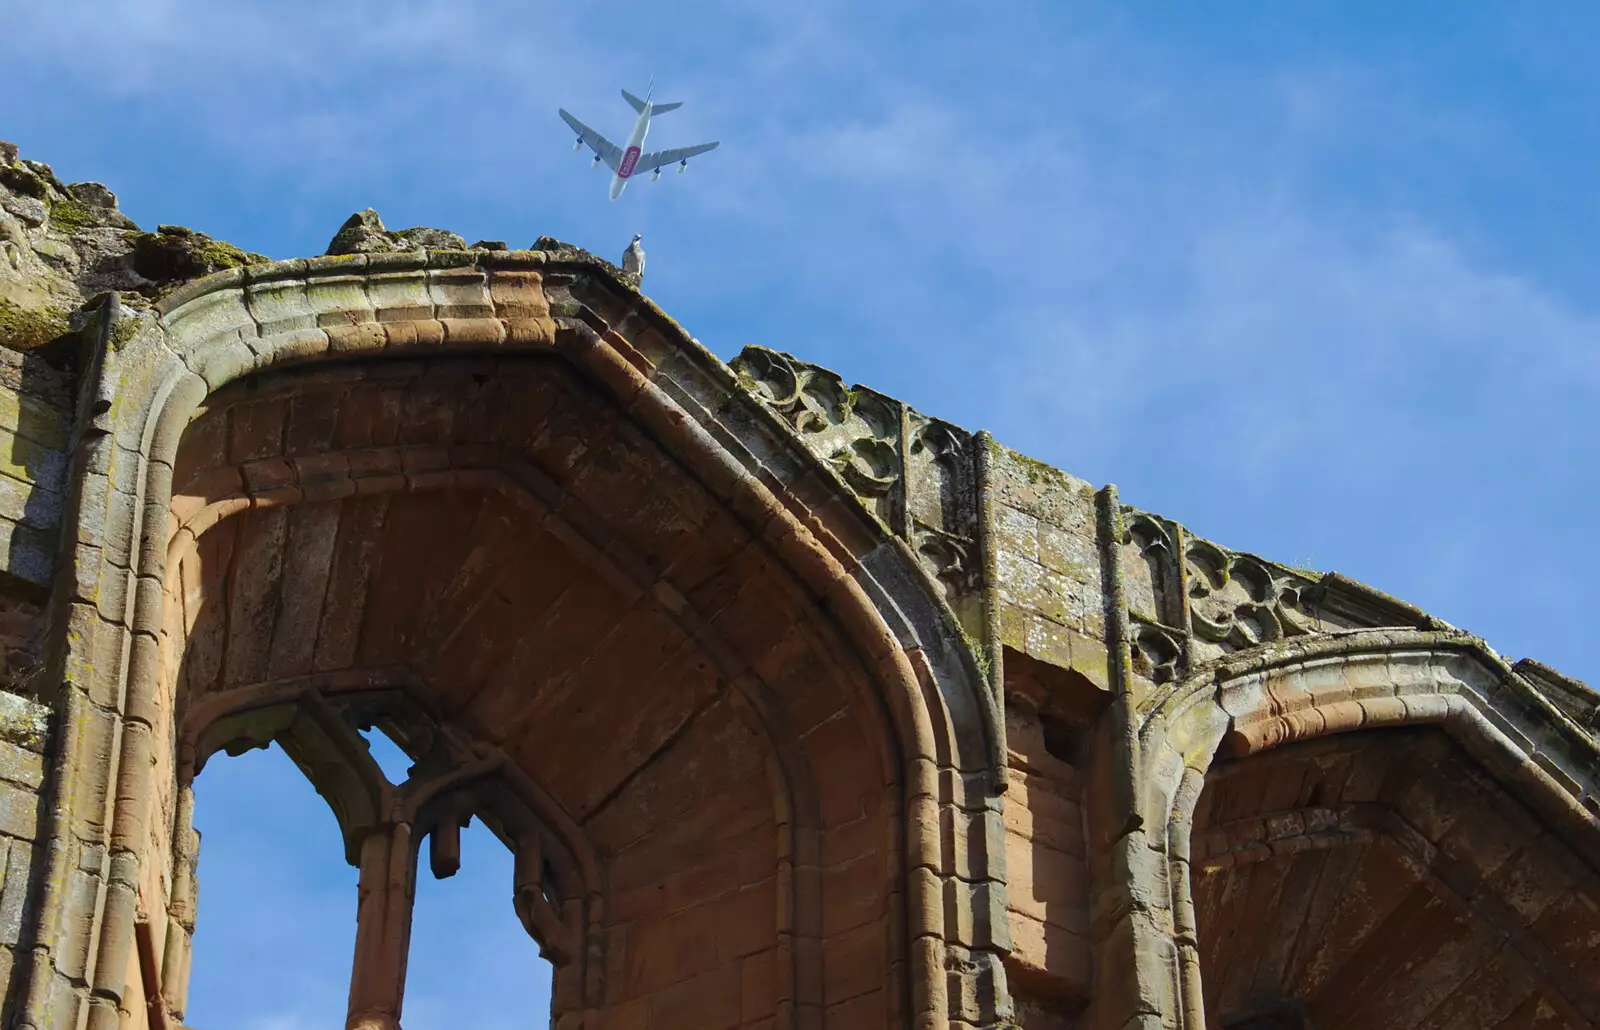 A plane flies over as a pigeon sits on a wall, from Kenilworth Castle and the 69th Entry Reunion Dinner, Stratford, Warwickshire - 14th September 2019